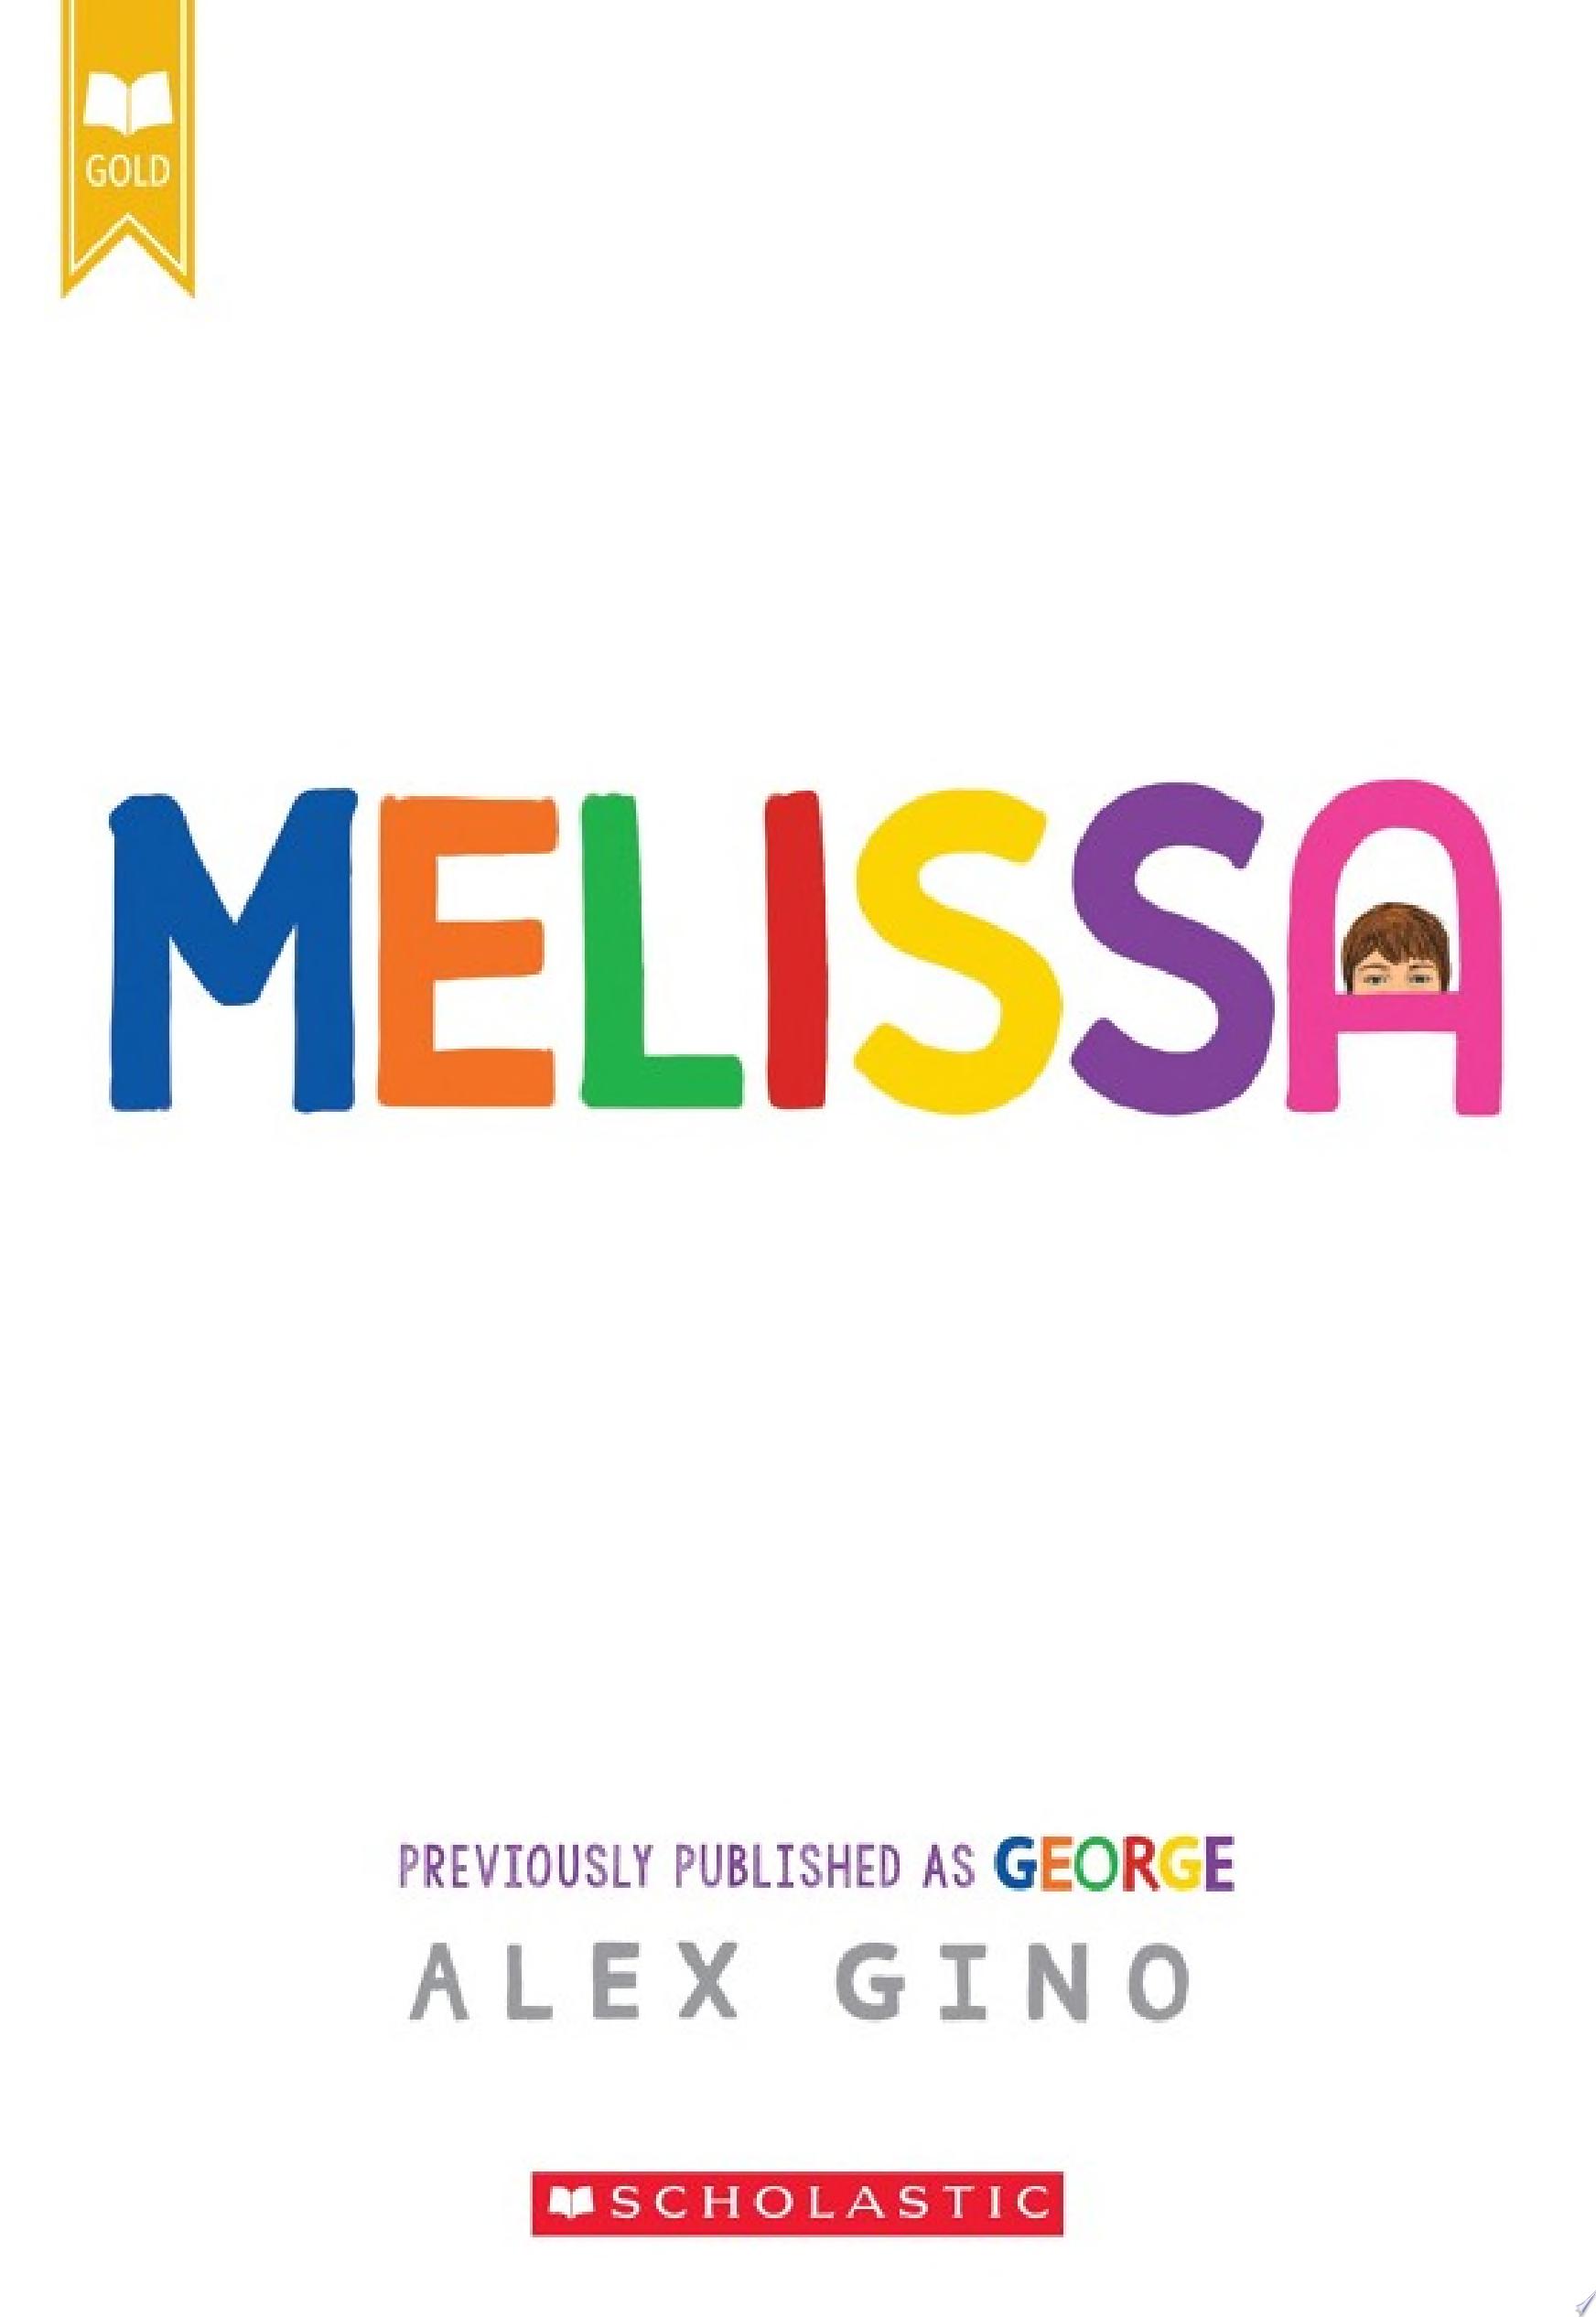 Image for "Melissa (previously published as GEORGE)"